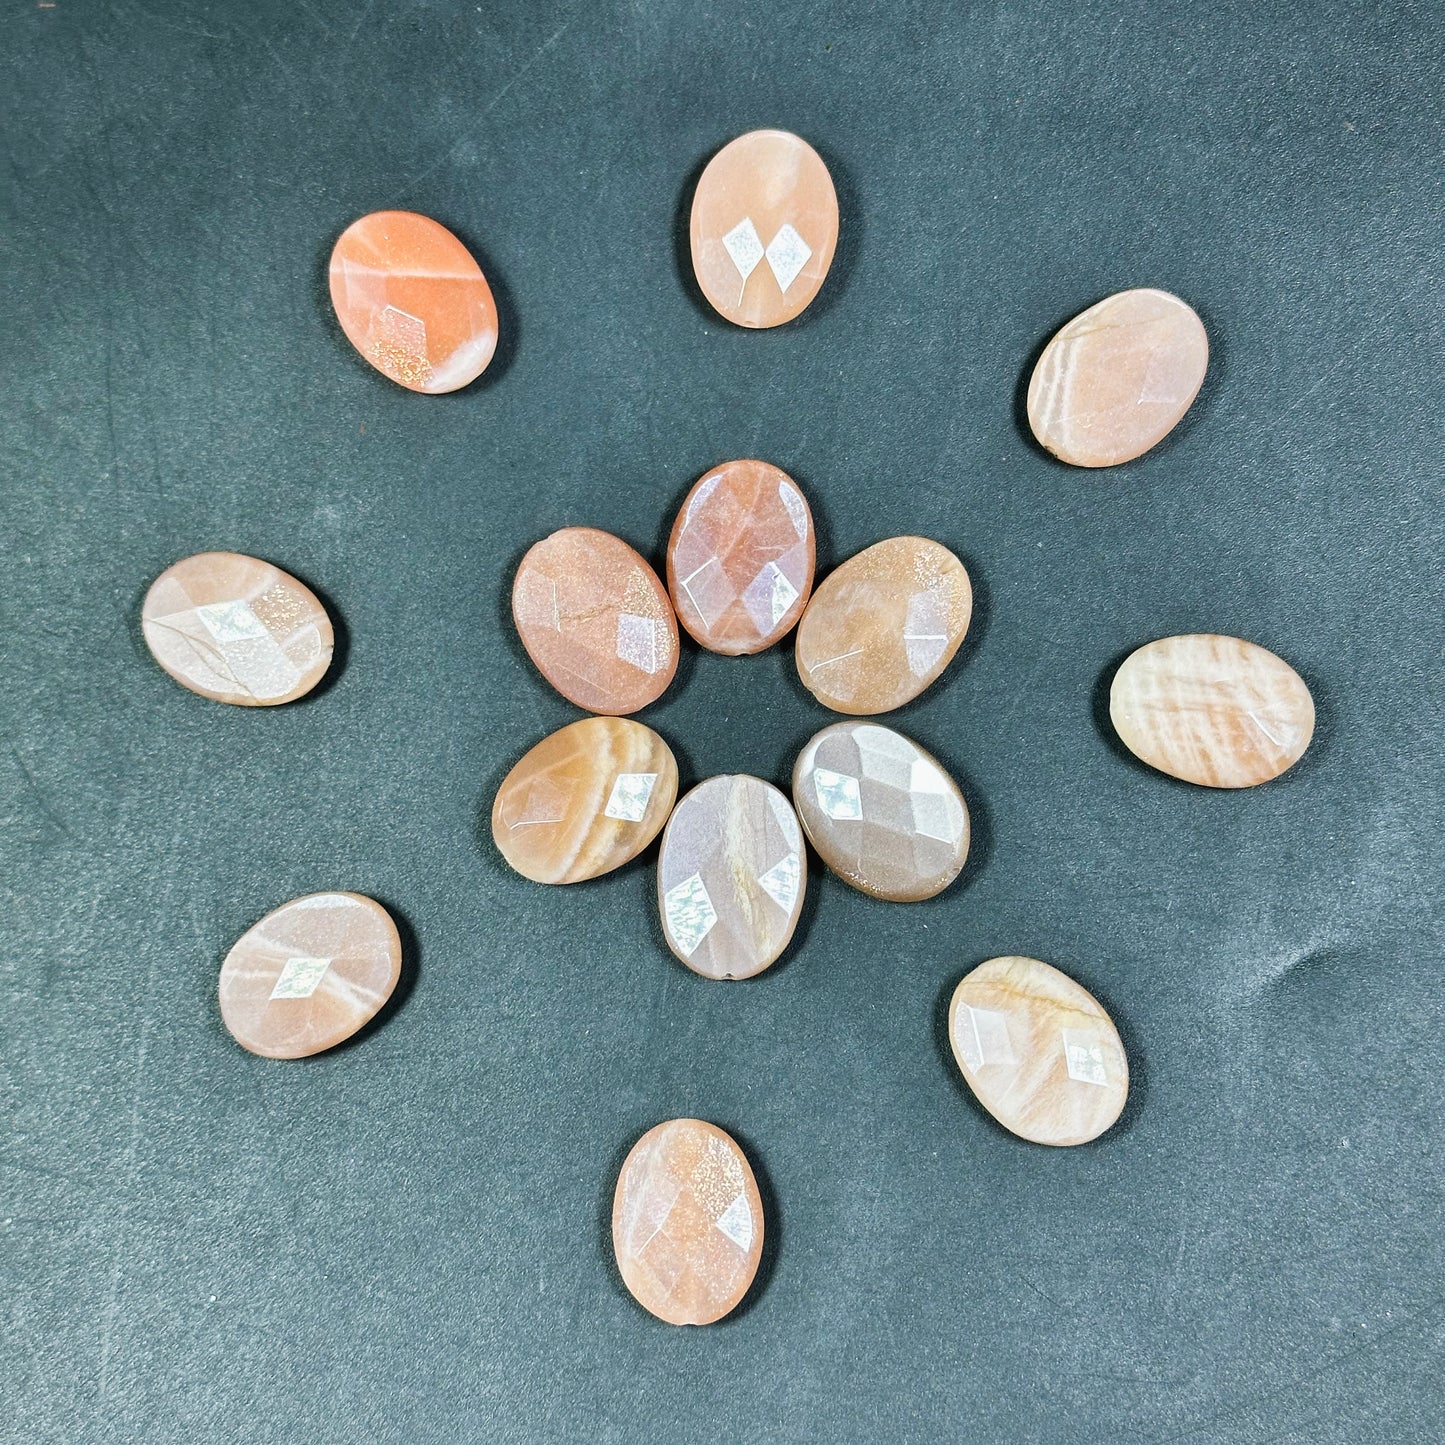 AAA Natural Peach Brown Moonstone Gemstone Bead Faceted 20x15mm Oval Shape, Gorgeous Peach Brown Color Shimmer Moonstone Bead, LOOSE BEADS